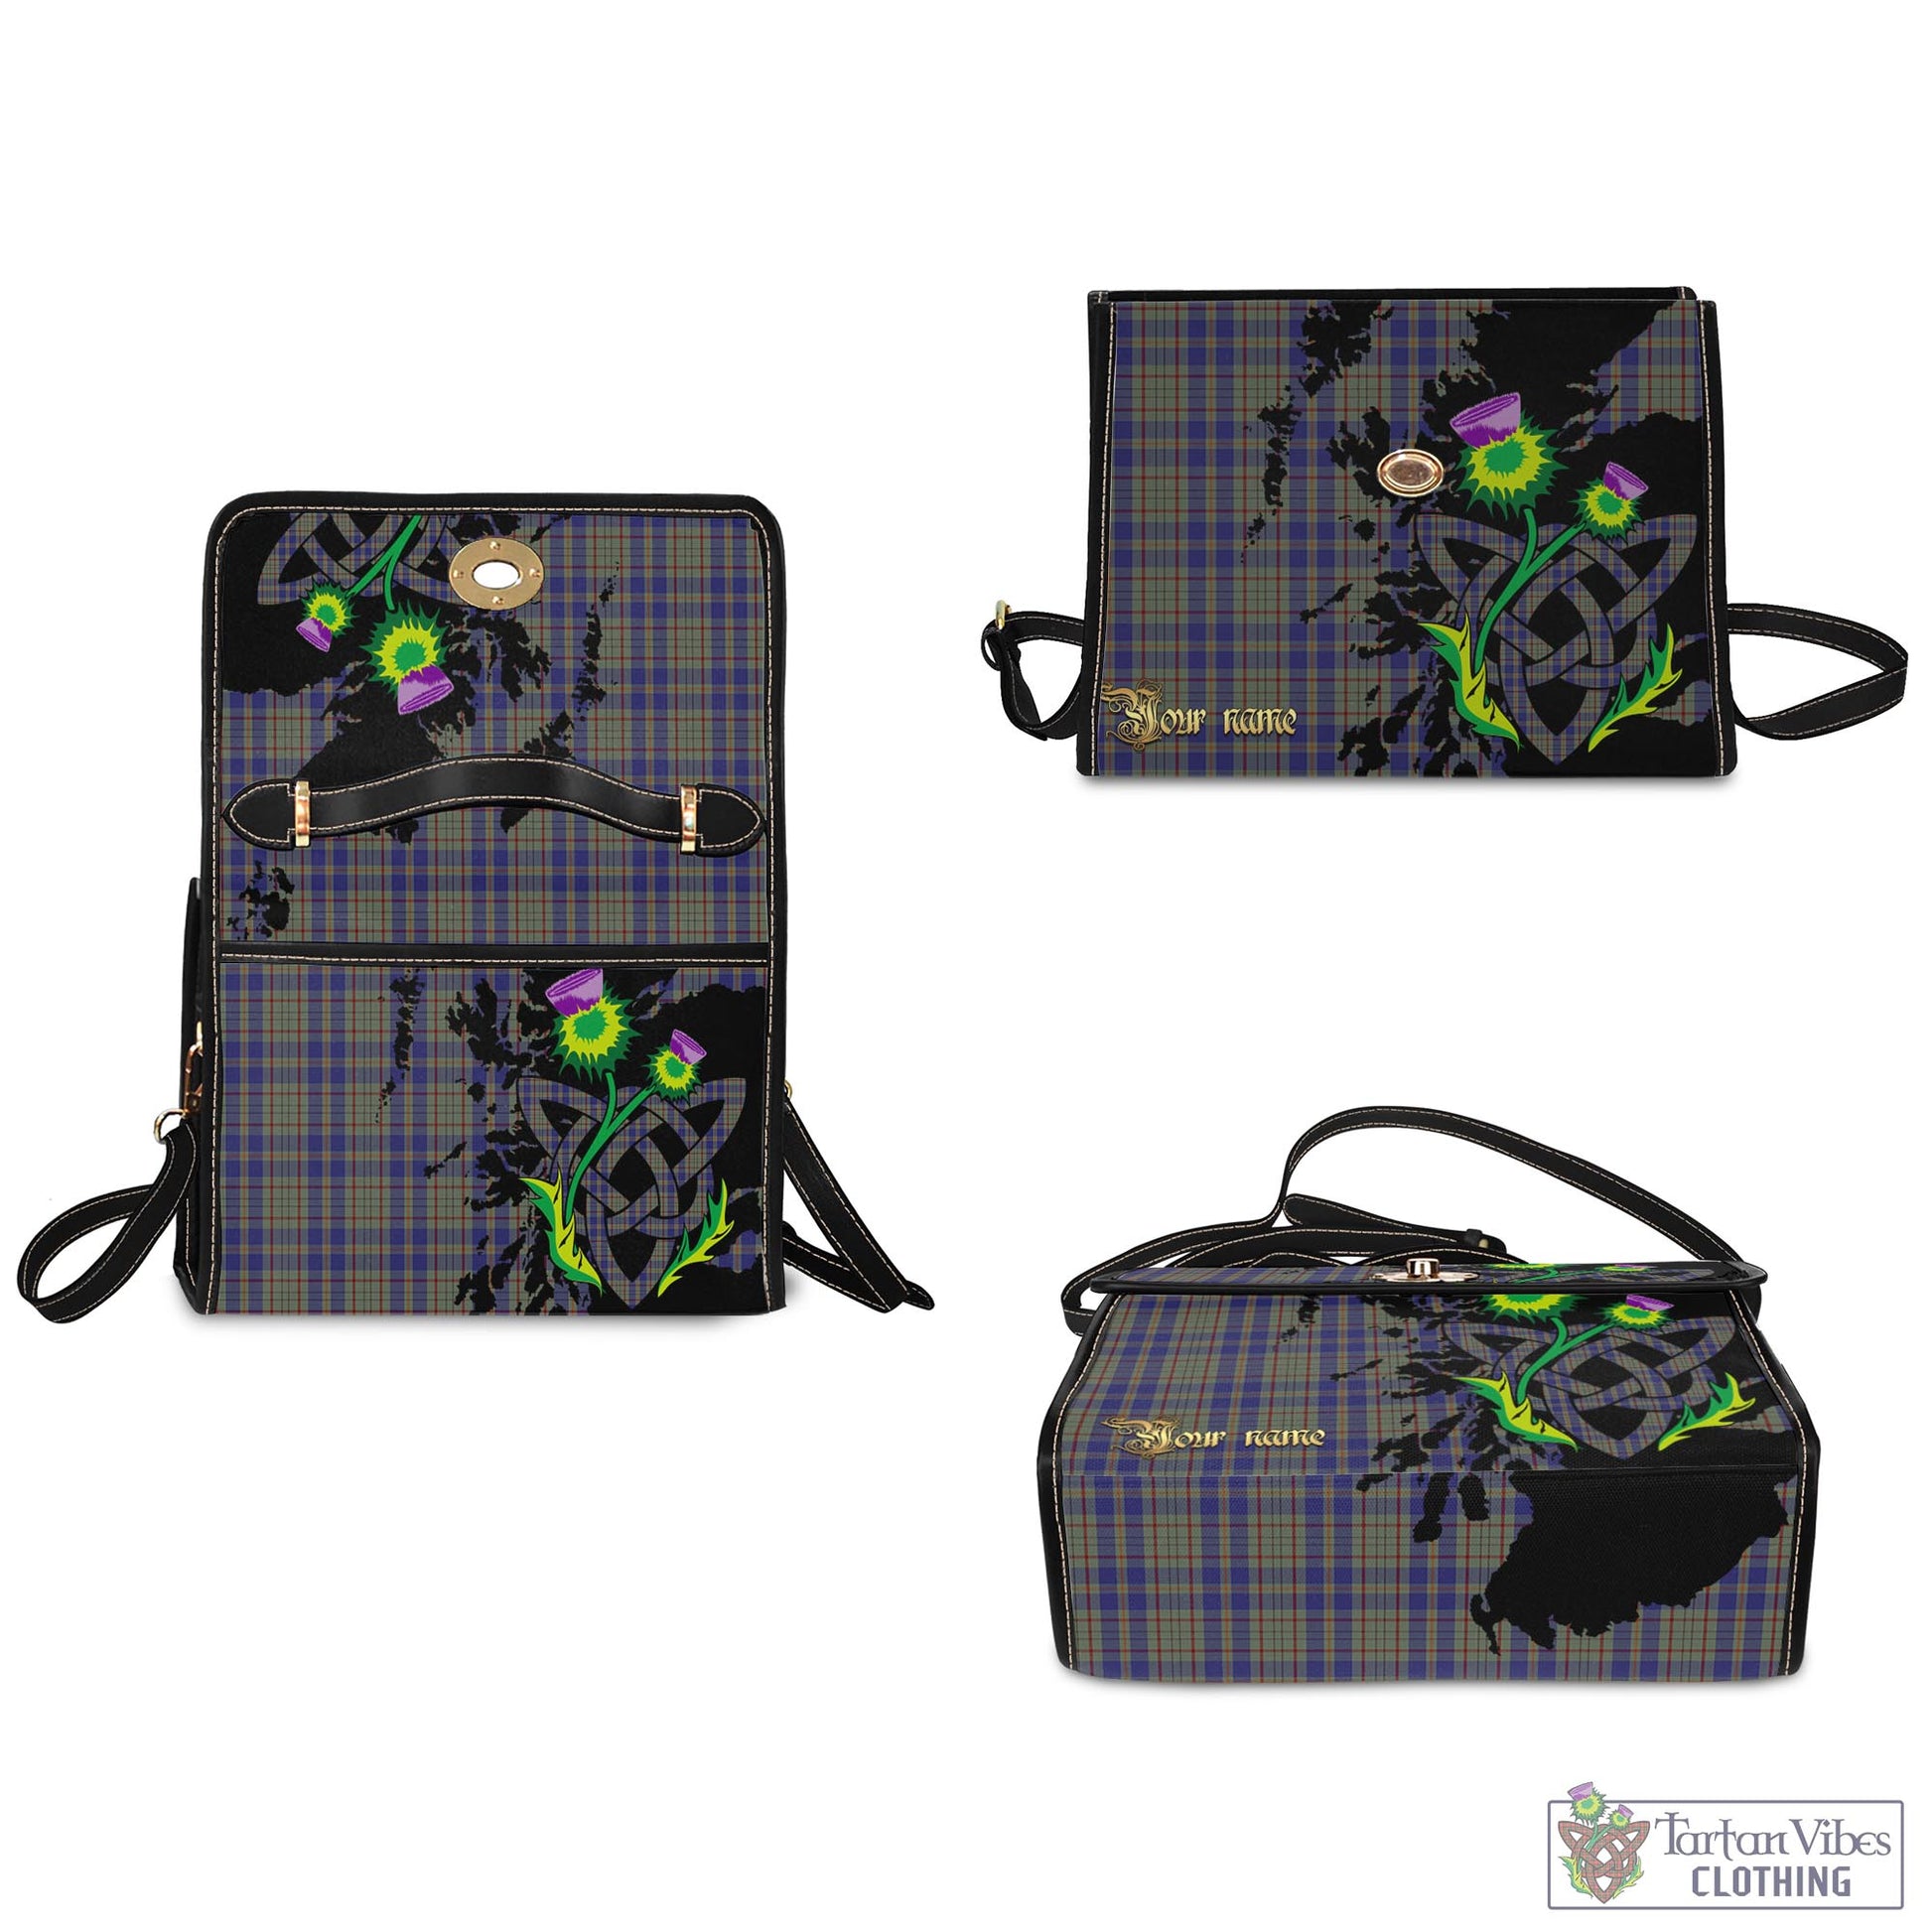 Tartan Vibes Clothing Kildare County Ireland Tartan Waterproof Canvas Bag with Scotland Map and Thistle Celtic Accents